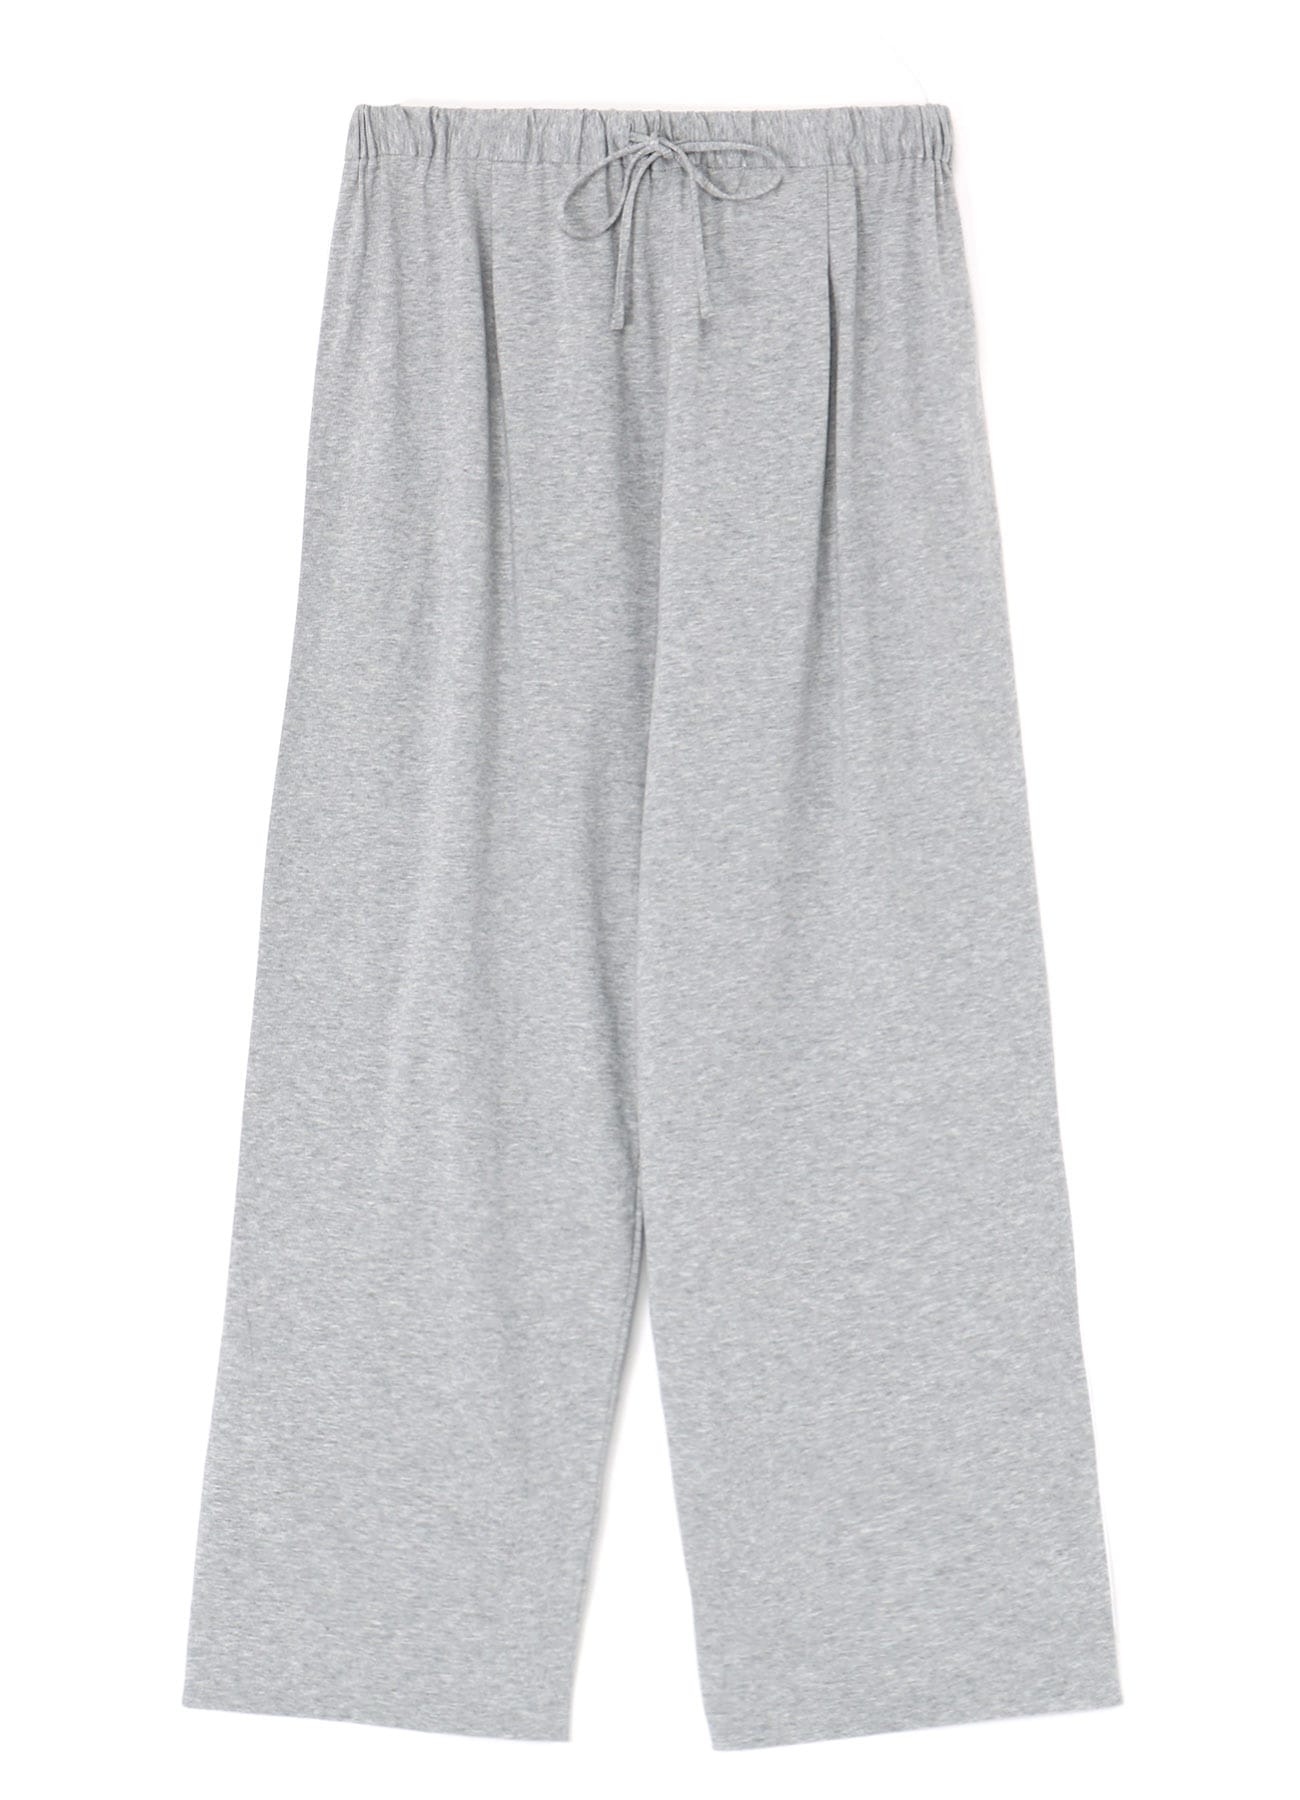 30/1 ORGANIC COTTON JERSEY PANTS (M)(M Top Gray): Y's for